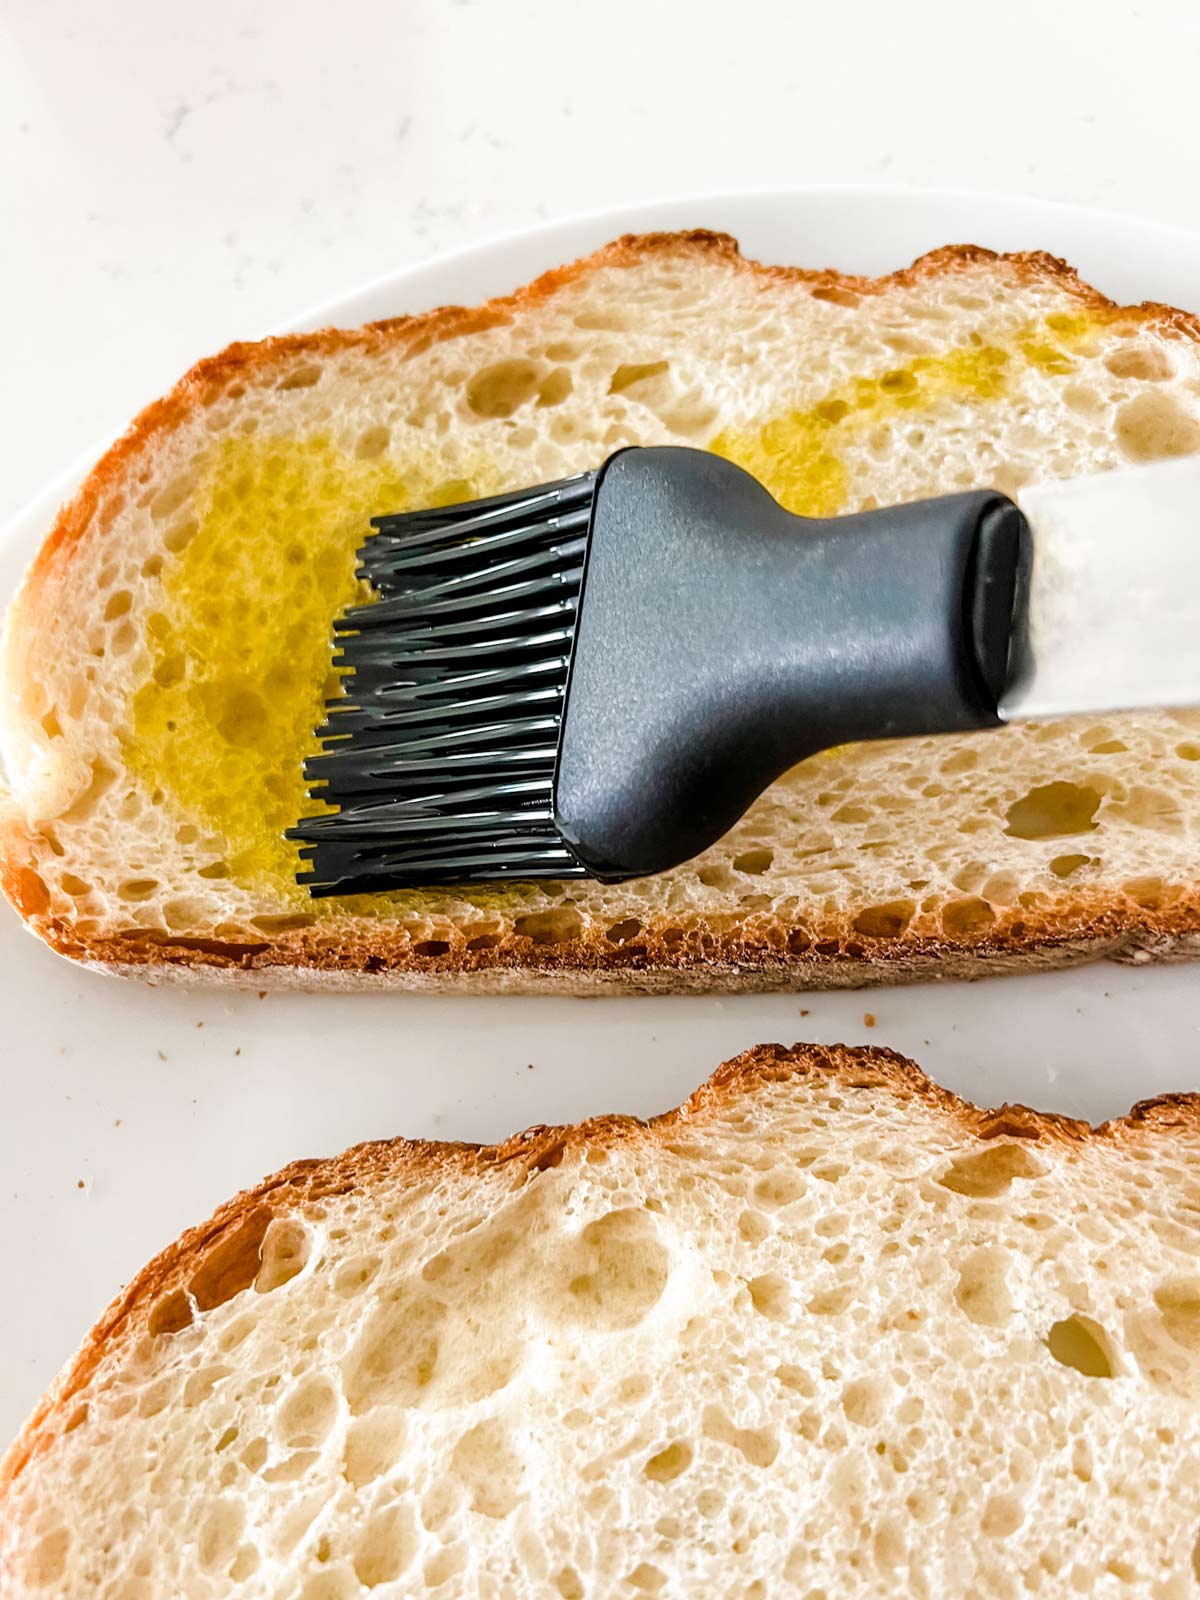 Bread being brushed with olive oil.